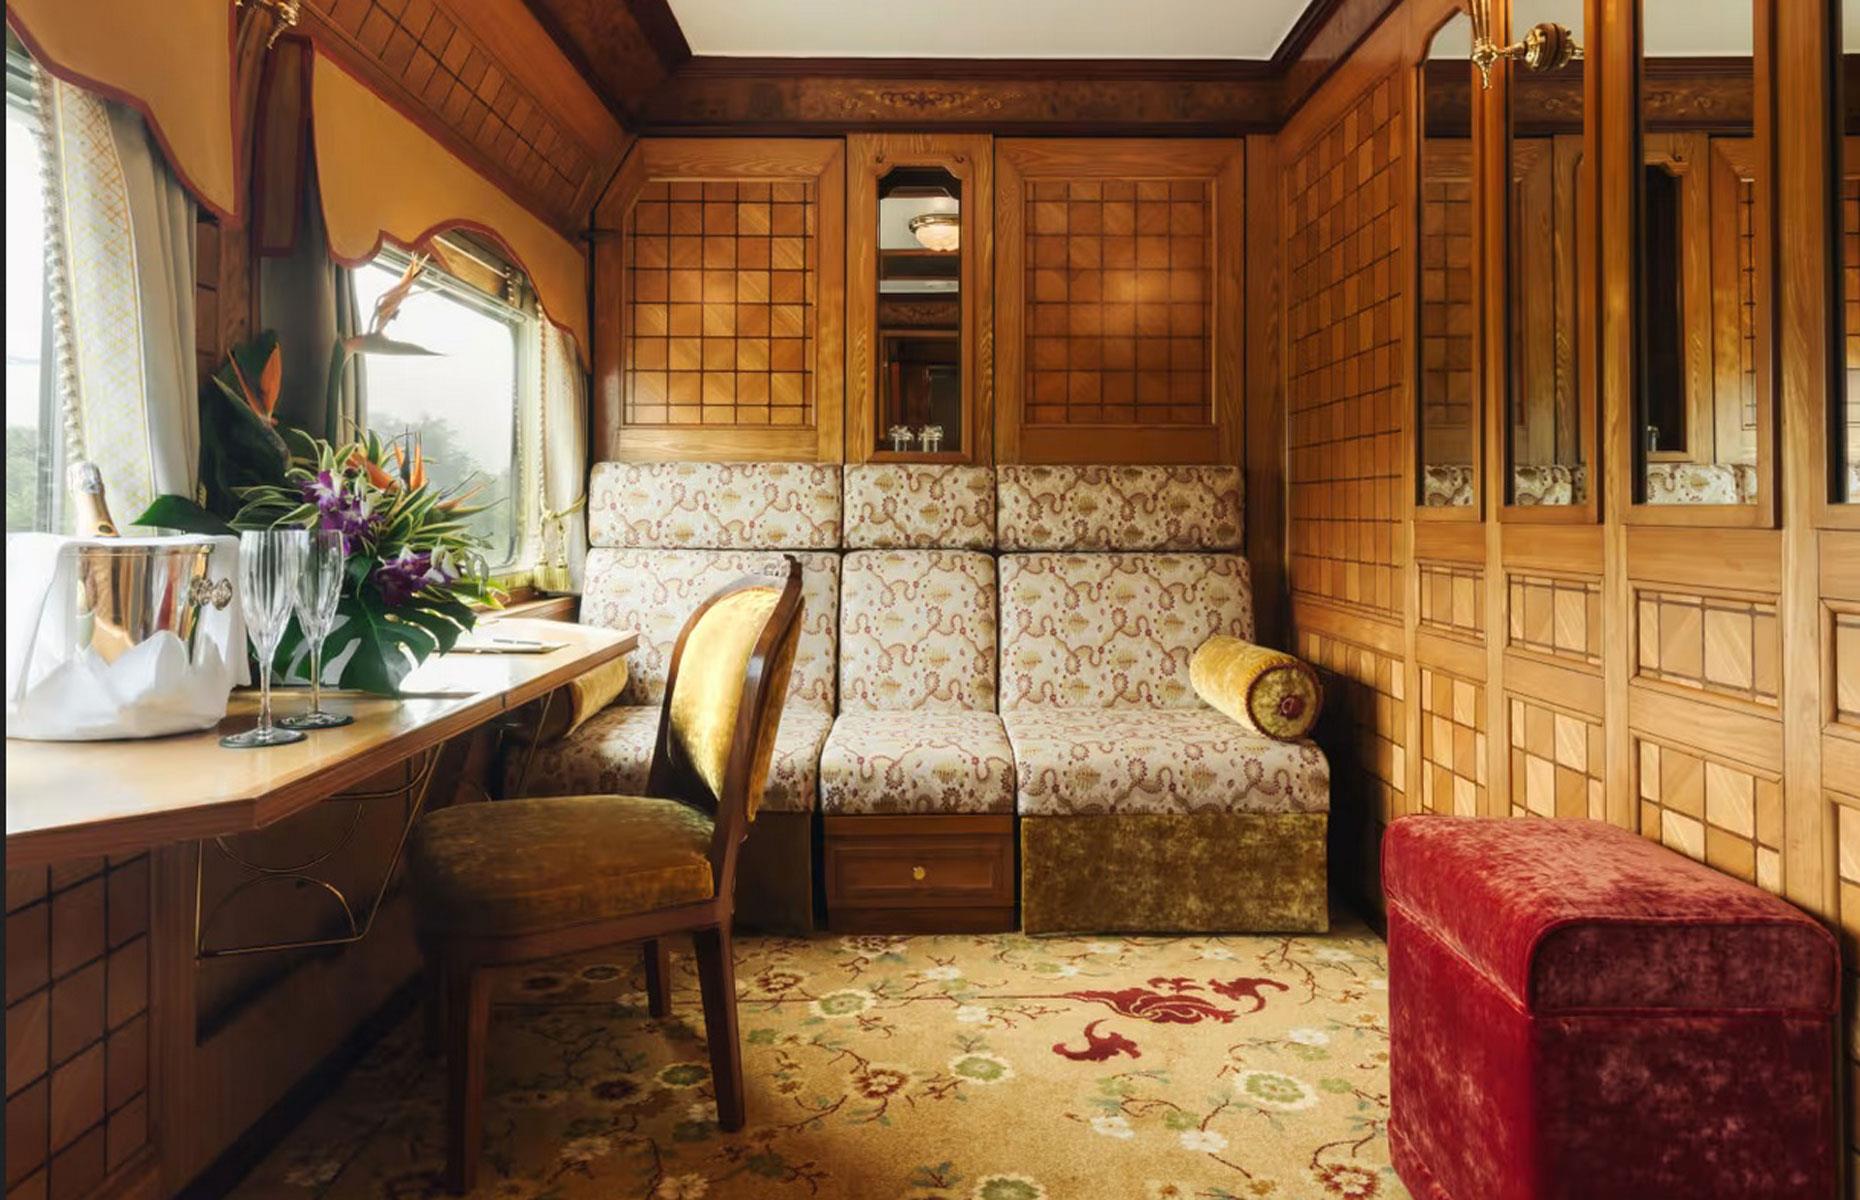 <p>The <em>Eastern & Oriental Express</em> offers two four-day, three-night trips departing from Singapore that explore Malaysia. Guests will get to relish gourmet local dishes, while artisans, musicians, and storytellers will be on board to provide immersive cultural experiences.</p>  <p>The 125-square-foot (12 square meter) Presidential Suite is the most expensive option. Supremely comfortable, it features a large ensuite bathroom, top-class amenities, and superlative service, with caviar on arrival and champagne on tap.</p>  <p>Both trips start from $8,600 (£6,767) per person based on double occupancy or $17,200 (£13,533) for a single, which works out to $2,867 (£2,256) and $5,733 (£4,511) per night respectively.</p>